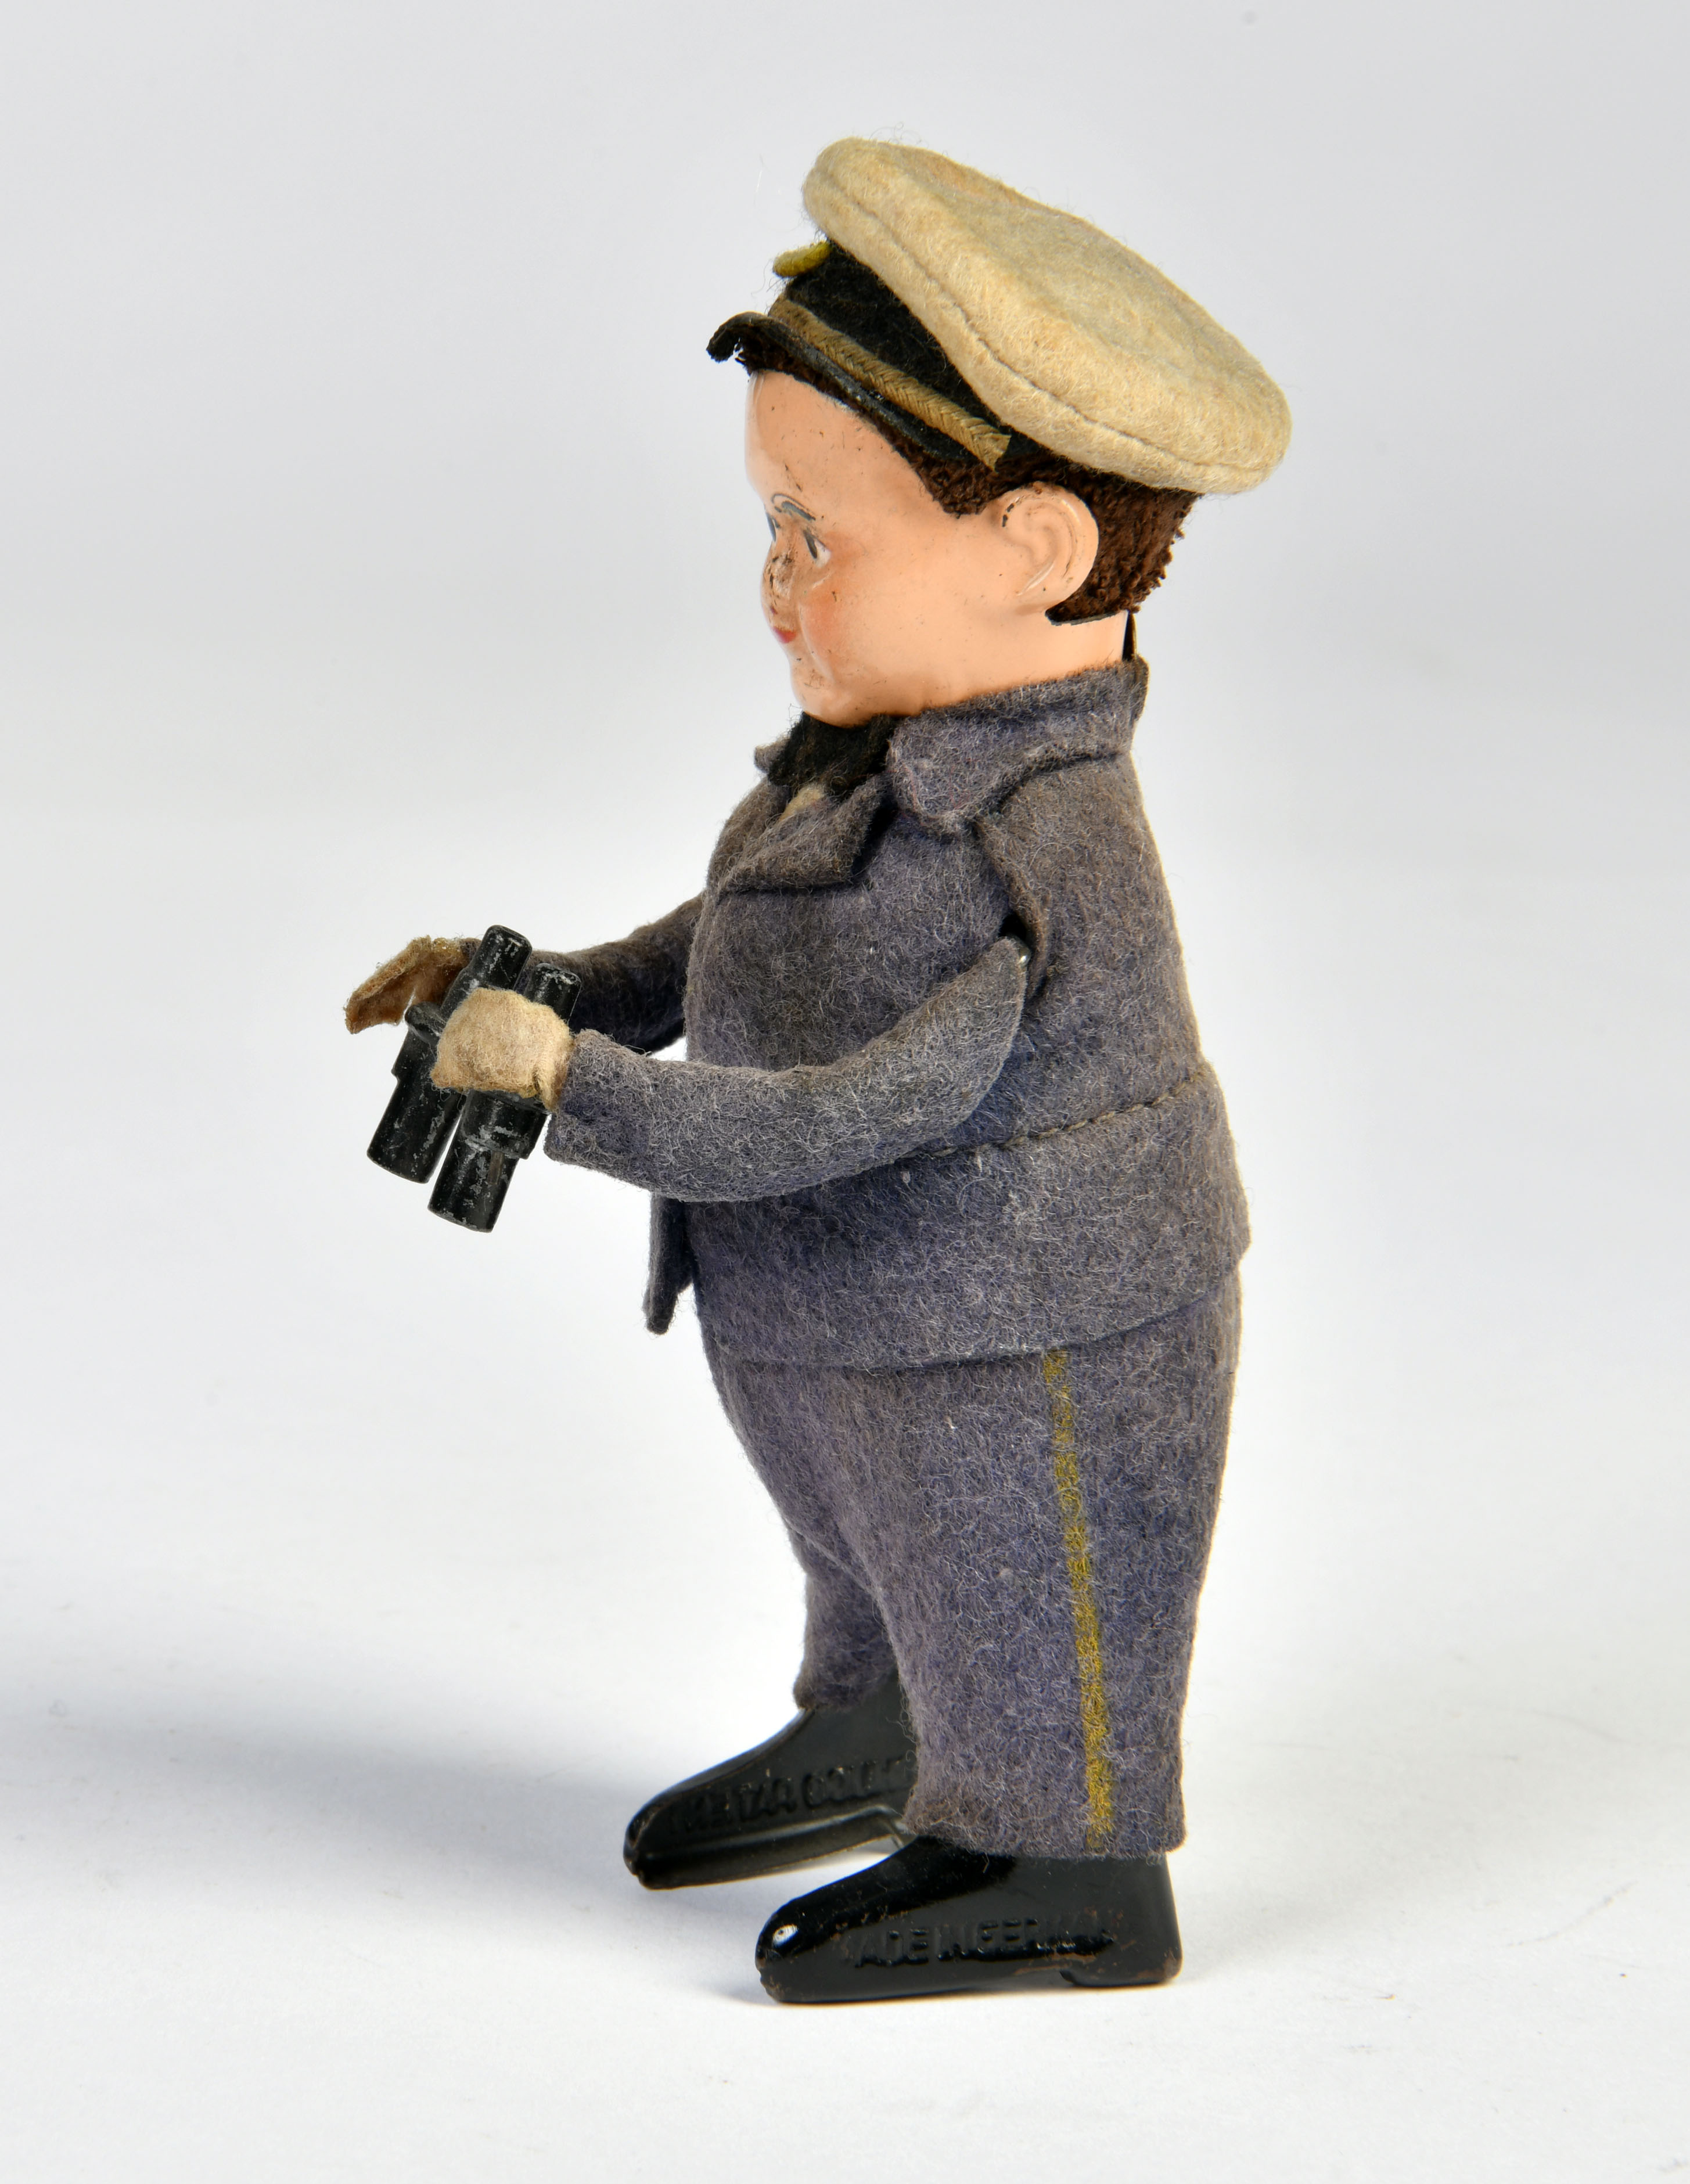 Schuco, captain with binoculars, Germany, cw ok, 13,5 cm, clothes dusty, C 2- - Image 2 of 2